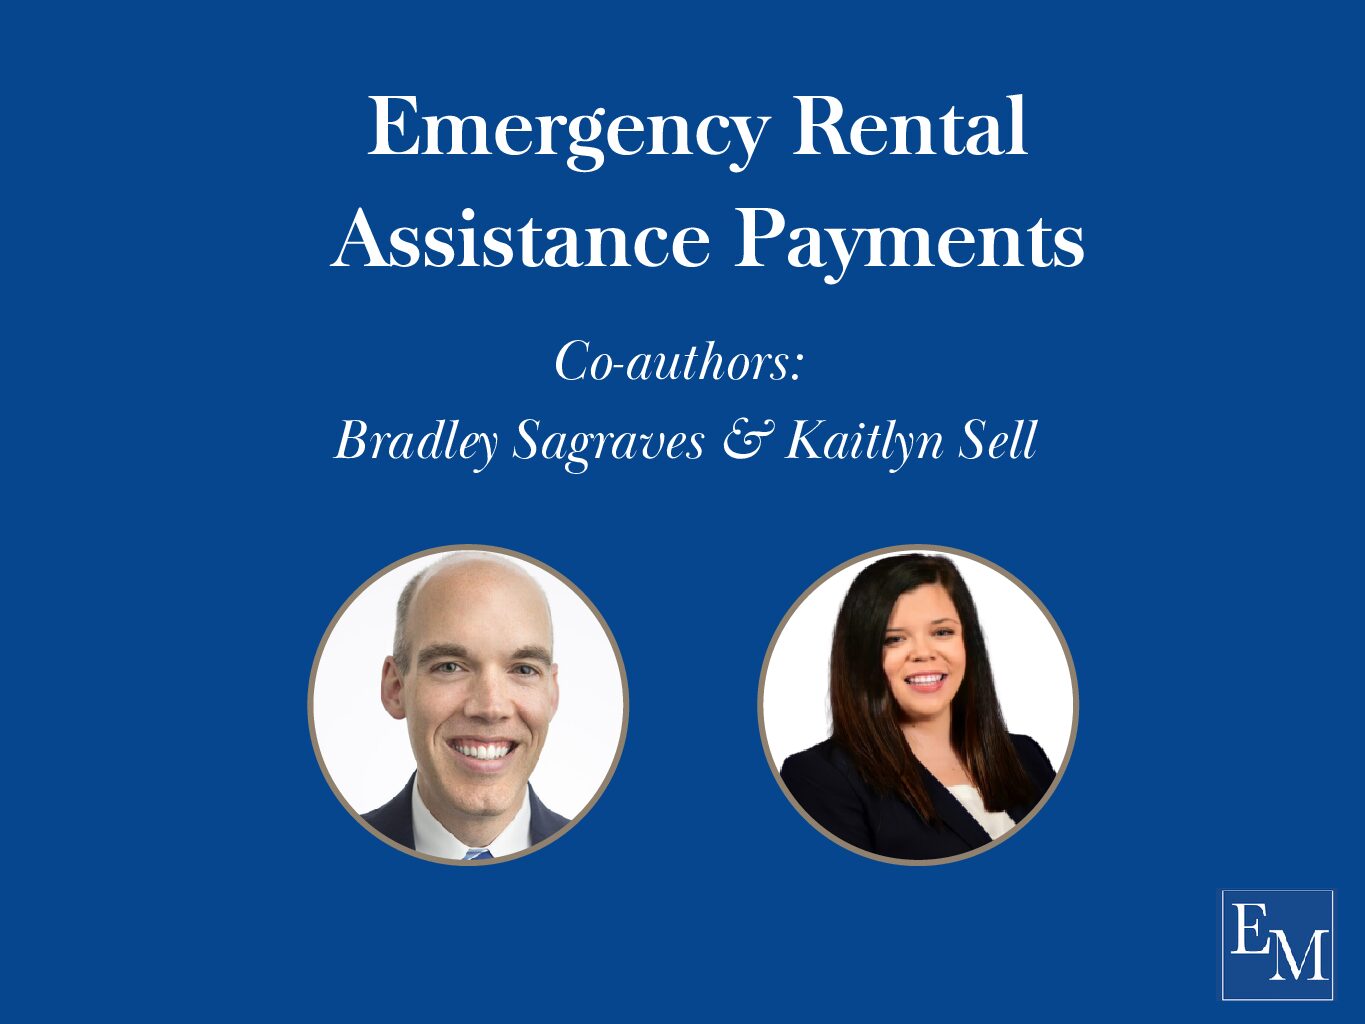 Emergency Rental Assistance Payments